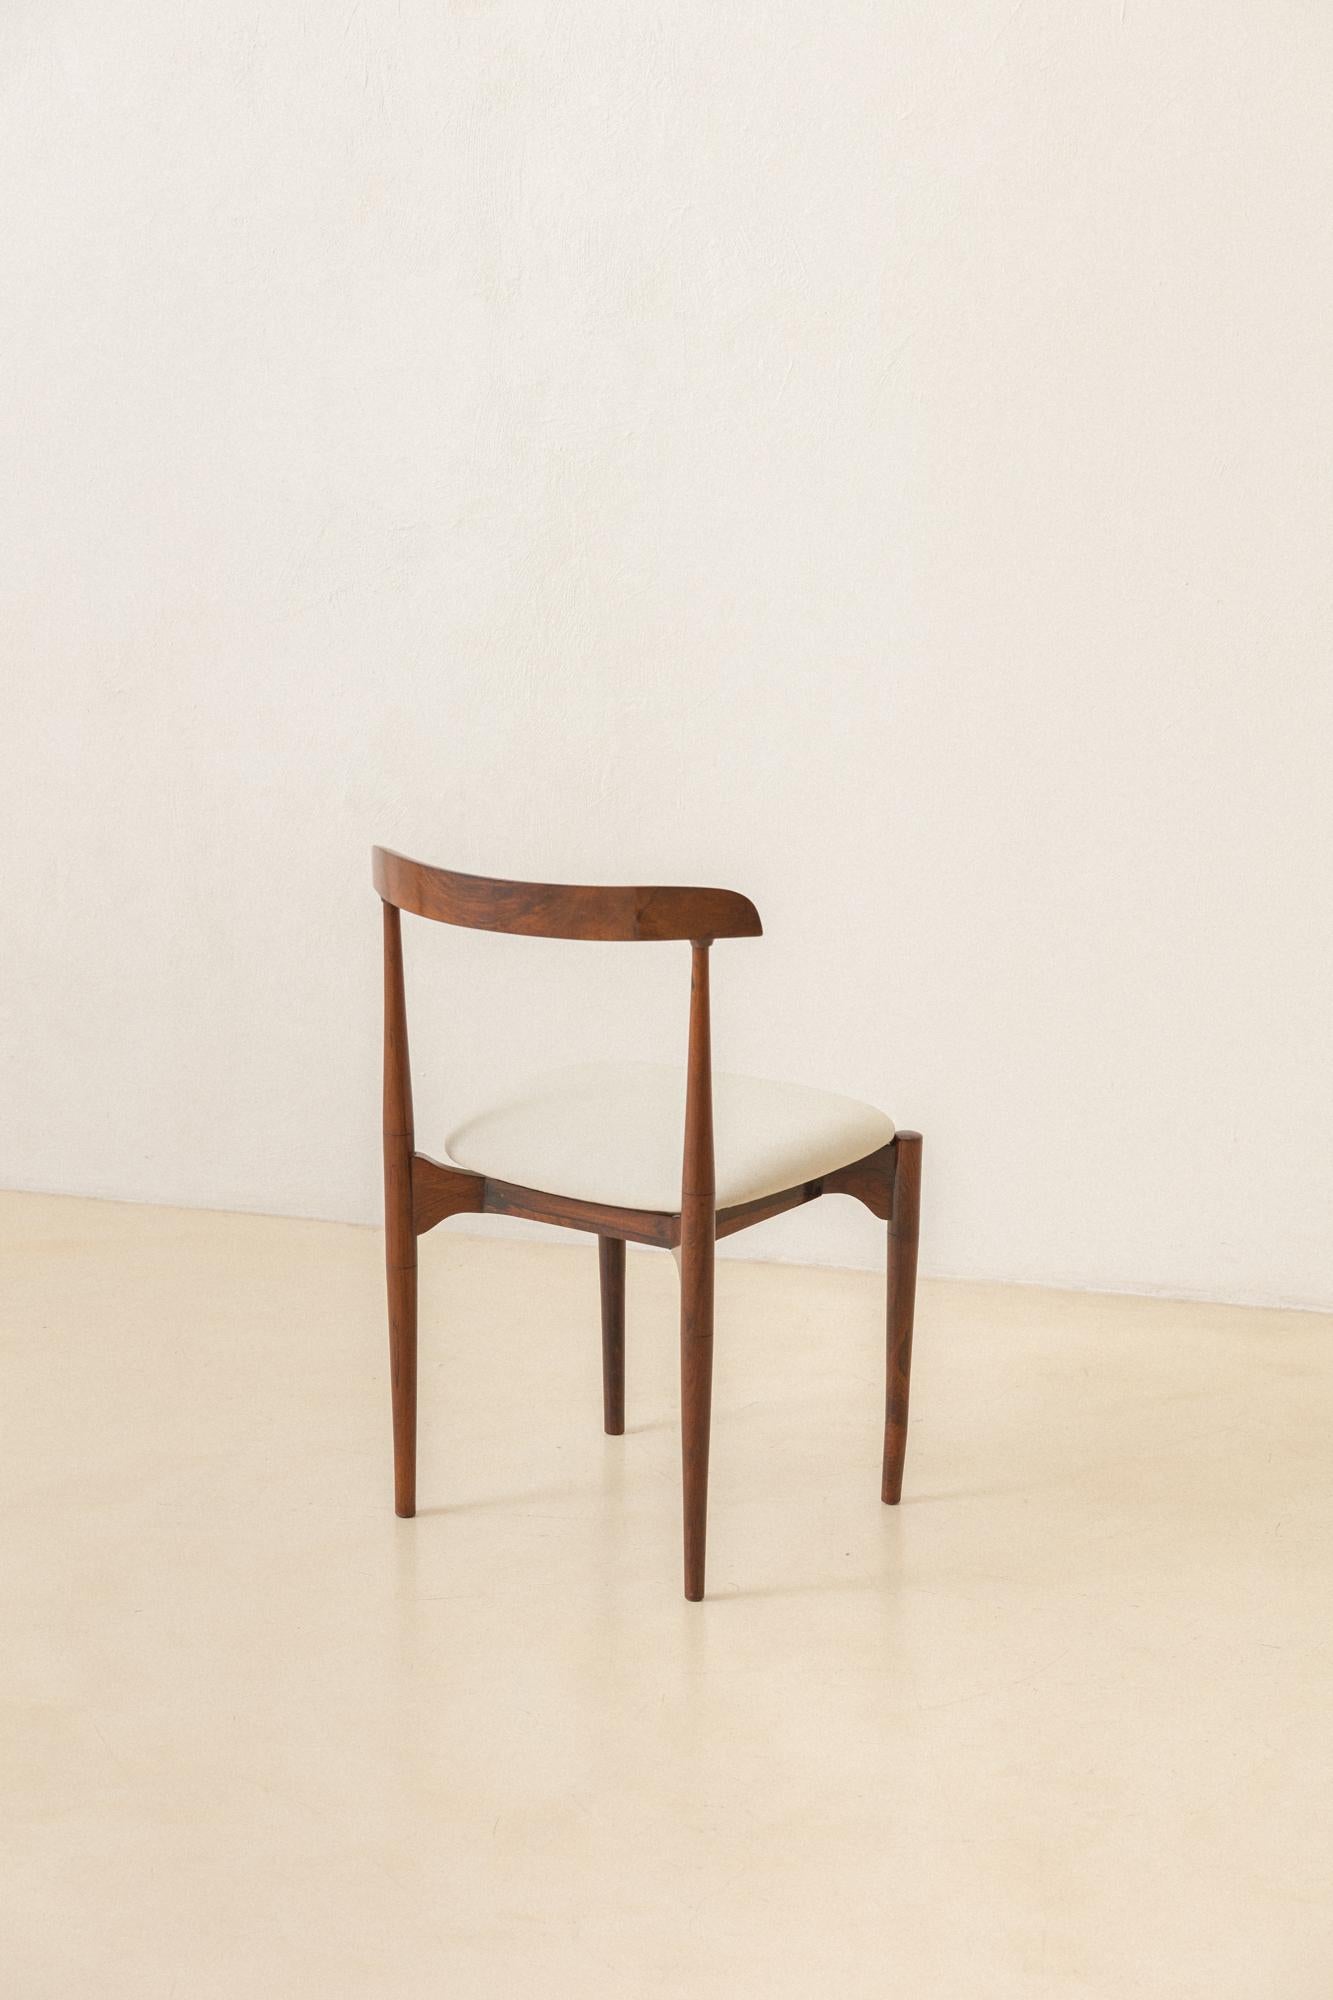 Mid-20th Century Rosewood Chair, Carlo Fongaro, 1950s, Rosewood, Brazilian Midcentury Design For Sale